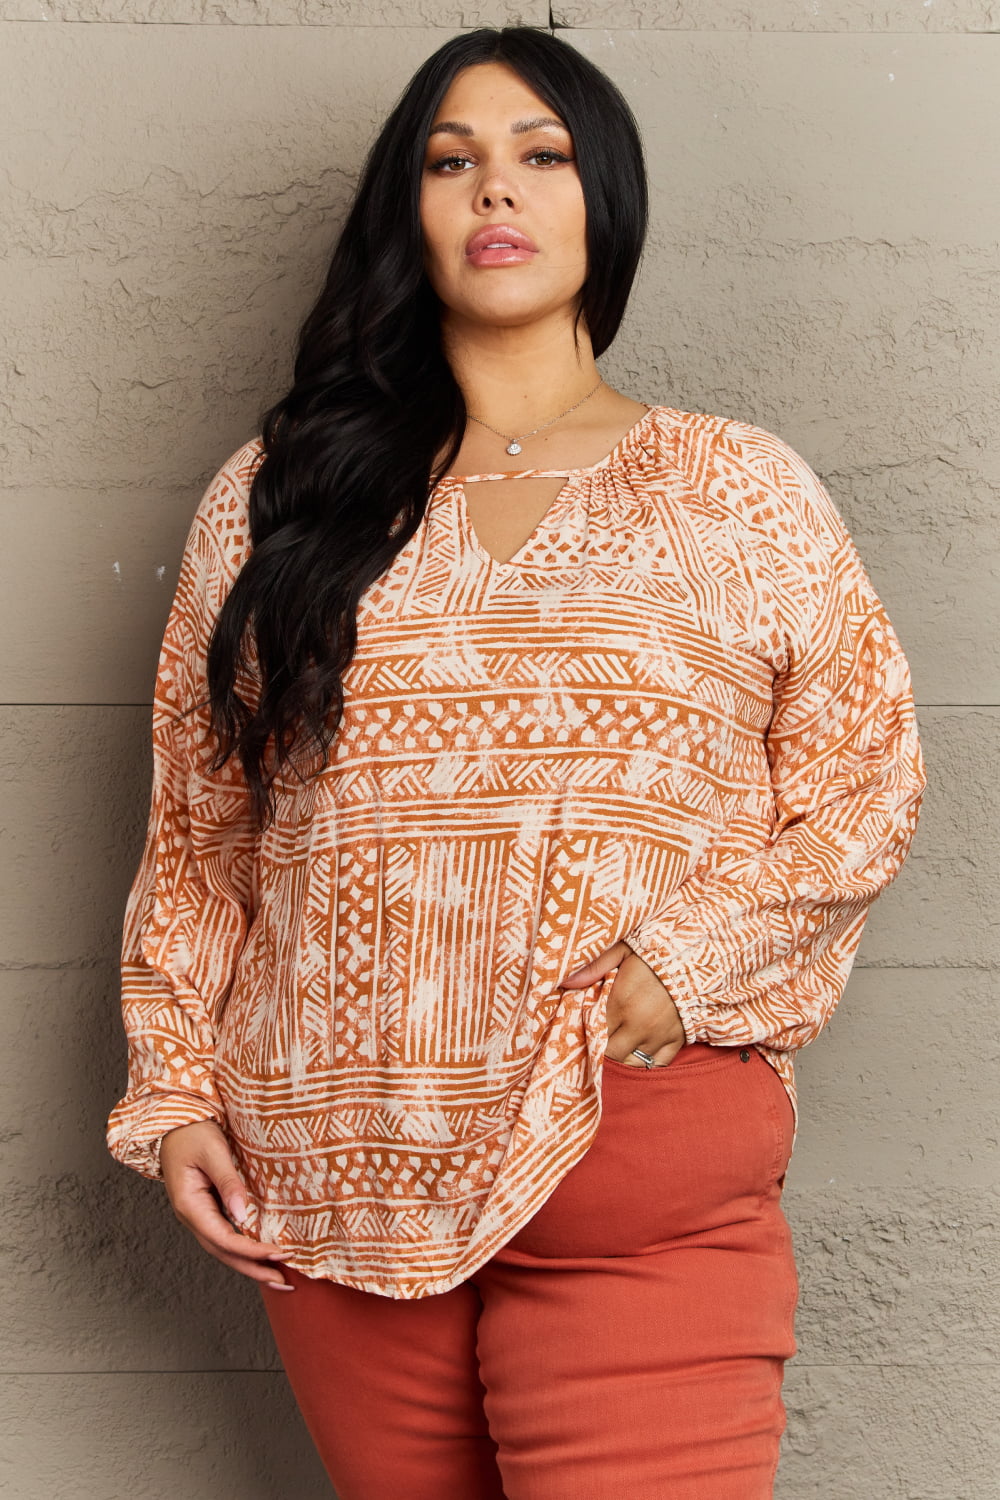 Just For You Full Size Aztec Tunic Top - Orange / S - Camis & Tops - Shirts & Tops - 1 - 2024